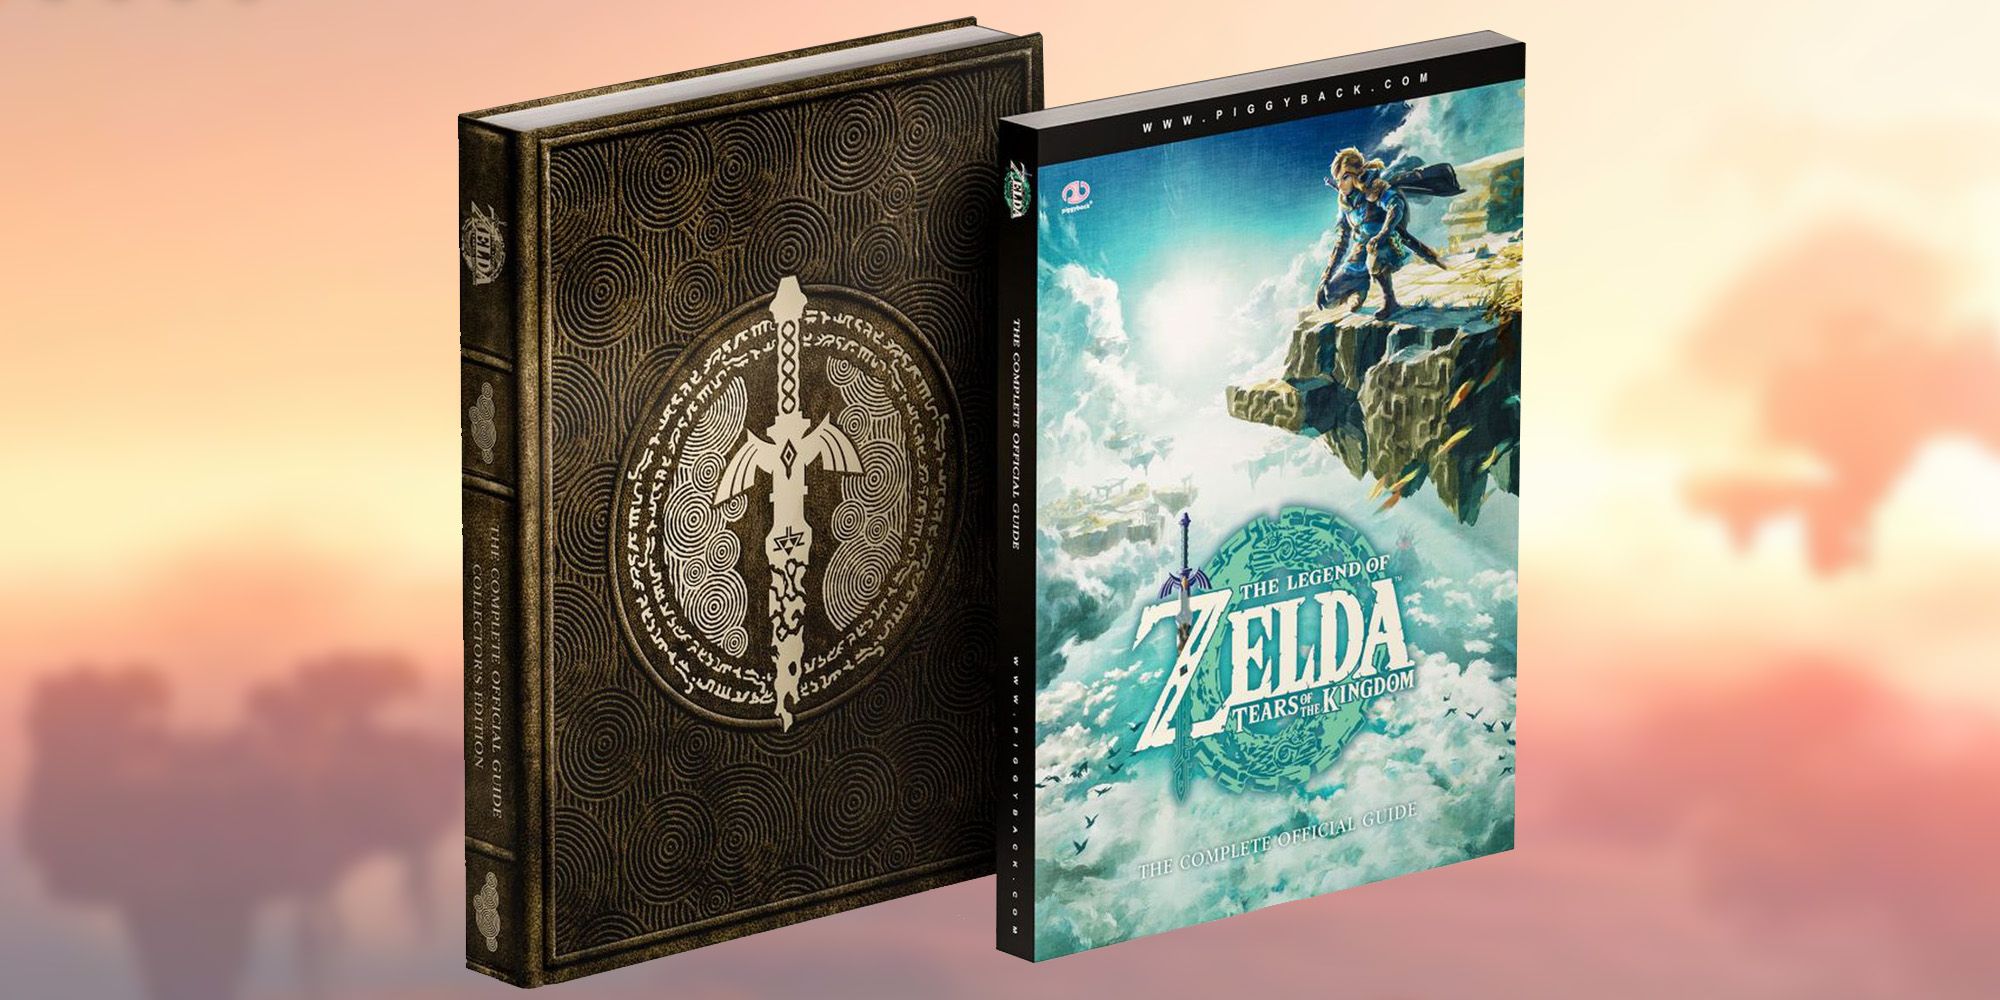 Covers for both the Collector's and Standard edition guides for The Legend of Zelda: Tears of the Kingdom superimposed onto an image of the sky from the game.